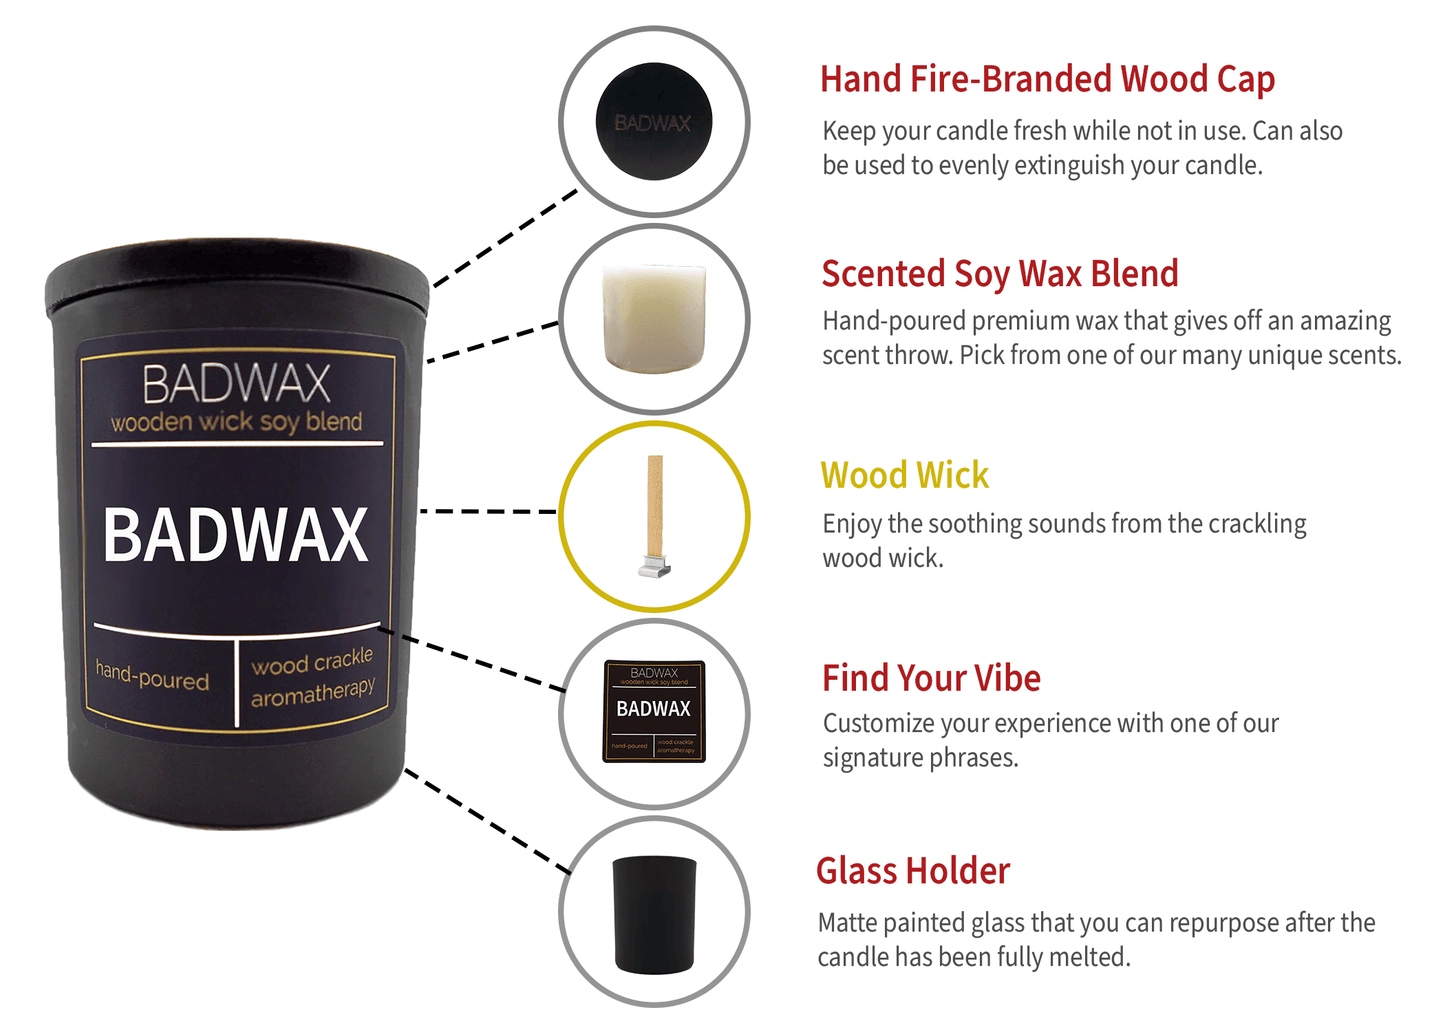 Congratulations You’re Not An Idiot - Woodwick Candle - BADWAX